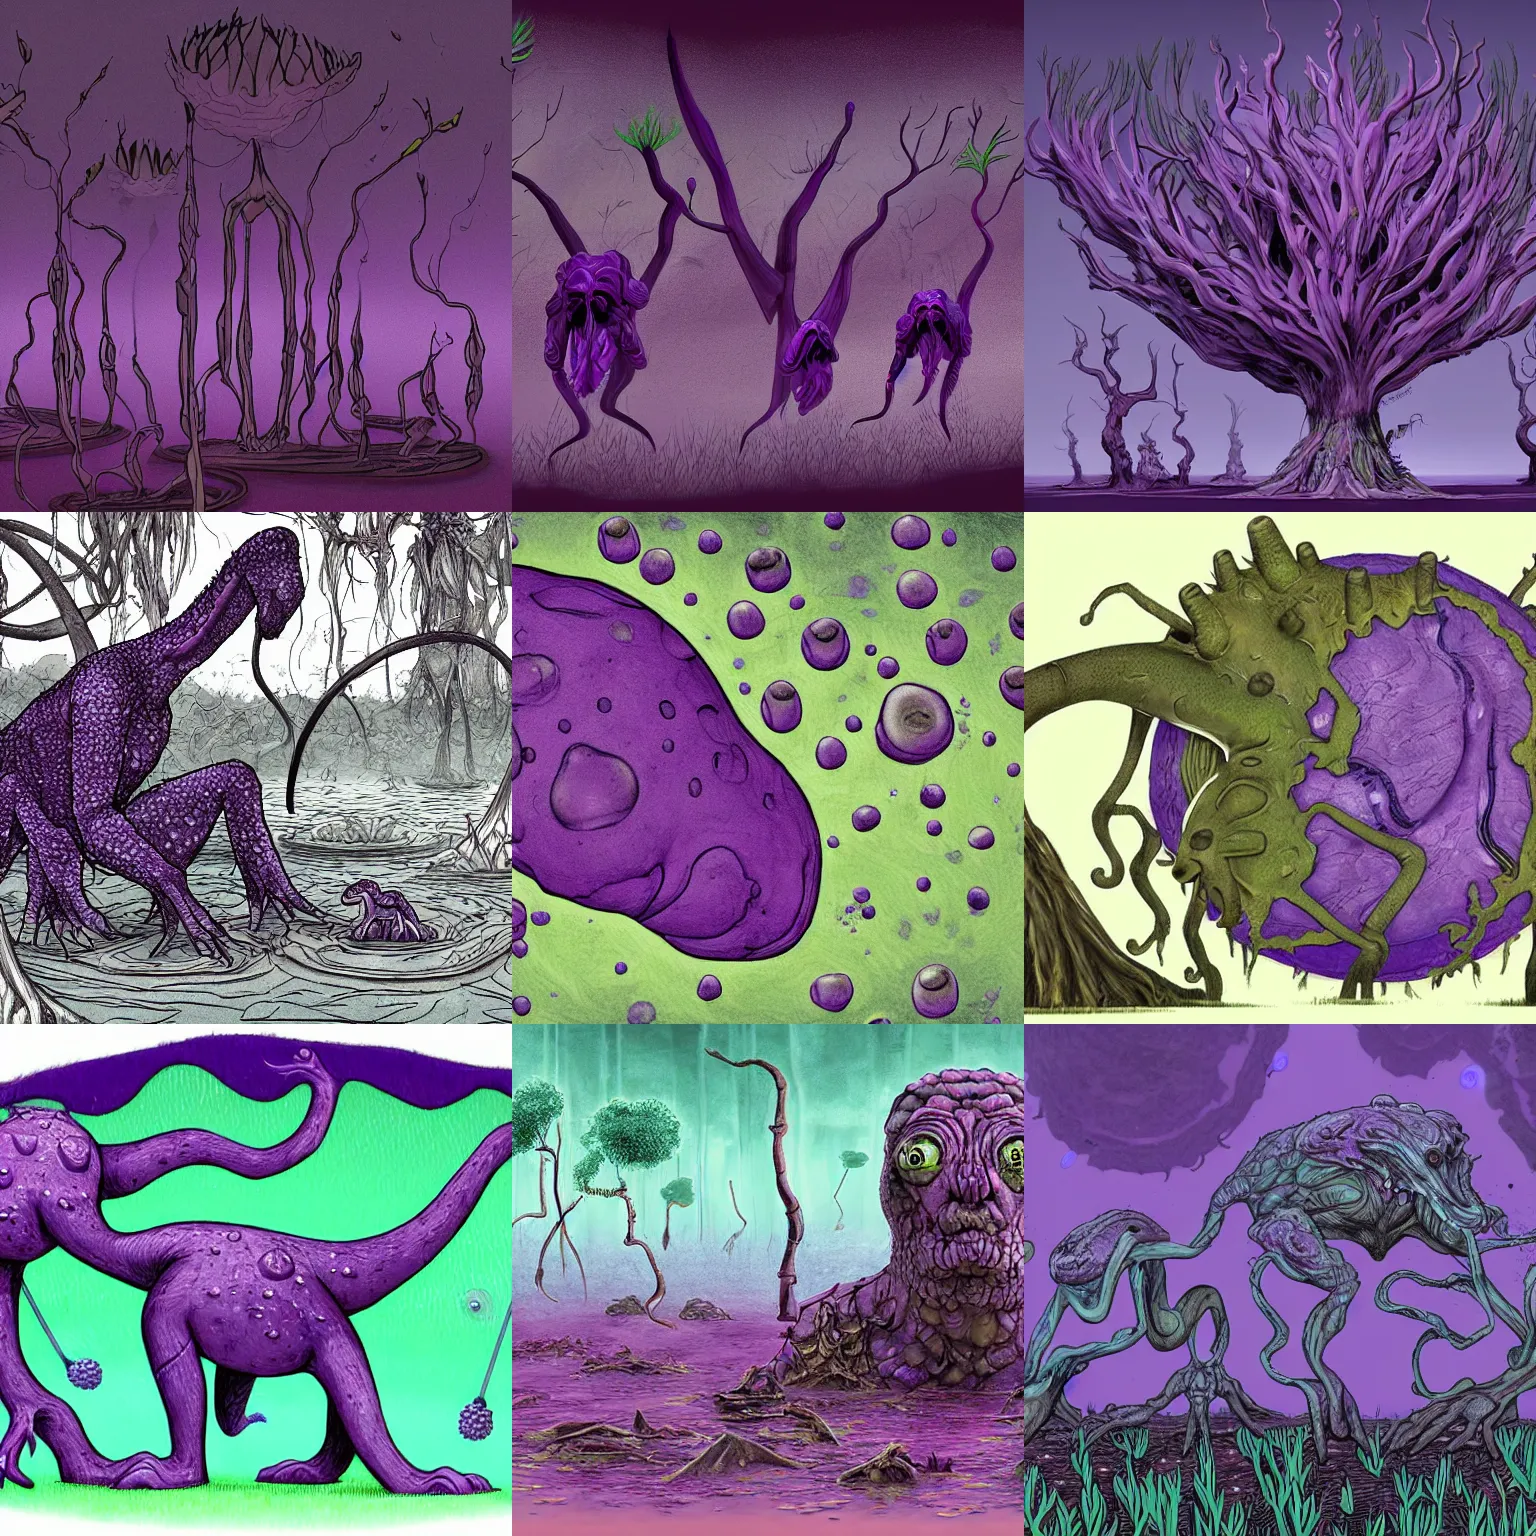 Prompt: creature adapted to swamps made of fertile purple mud and bulbous trees, speculative evolution exobiology astrobiology, sci - fi illustration